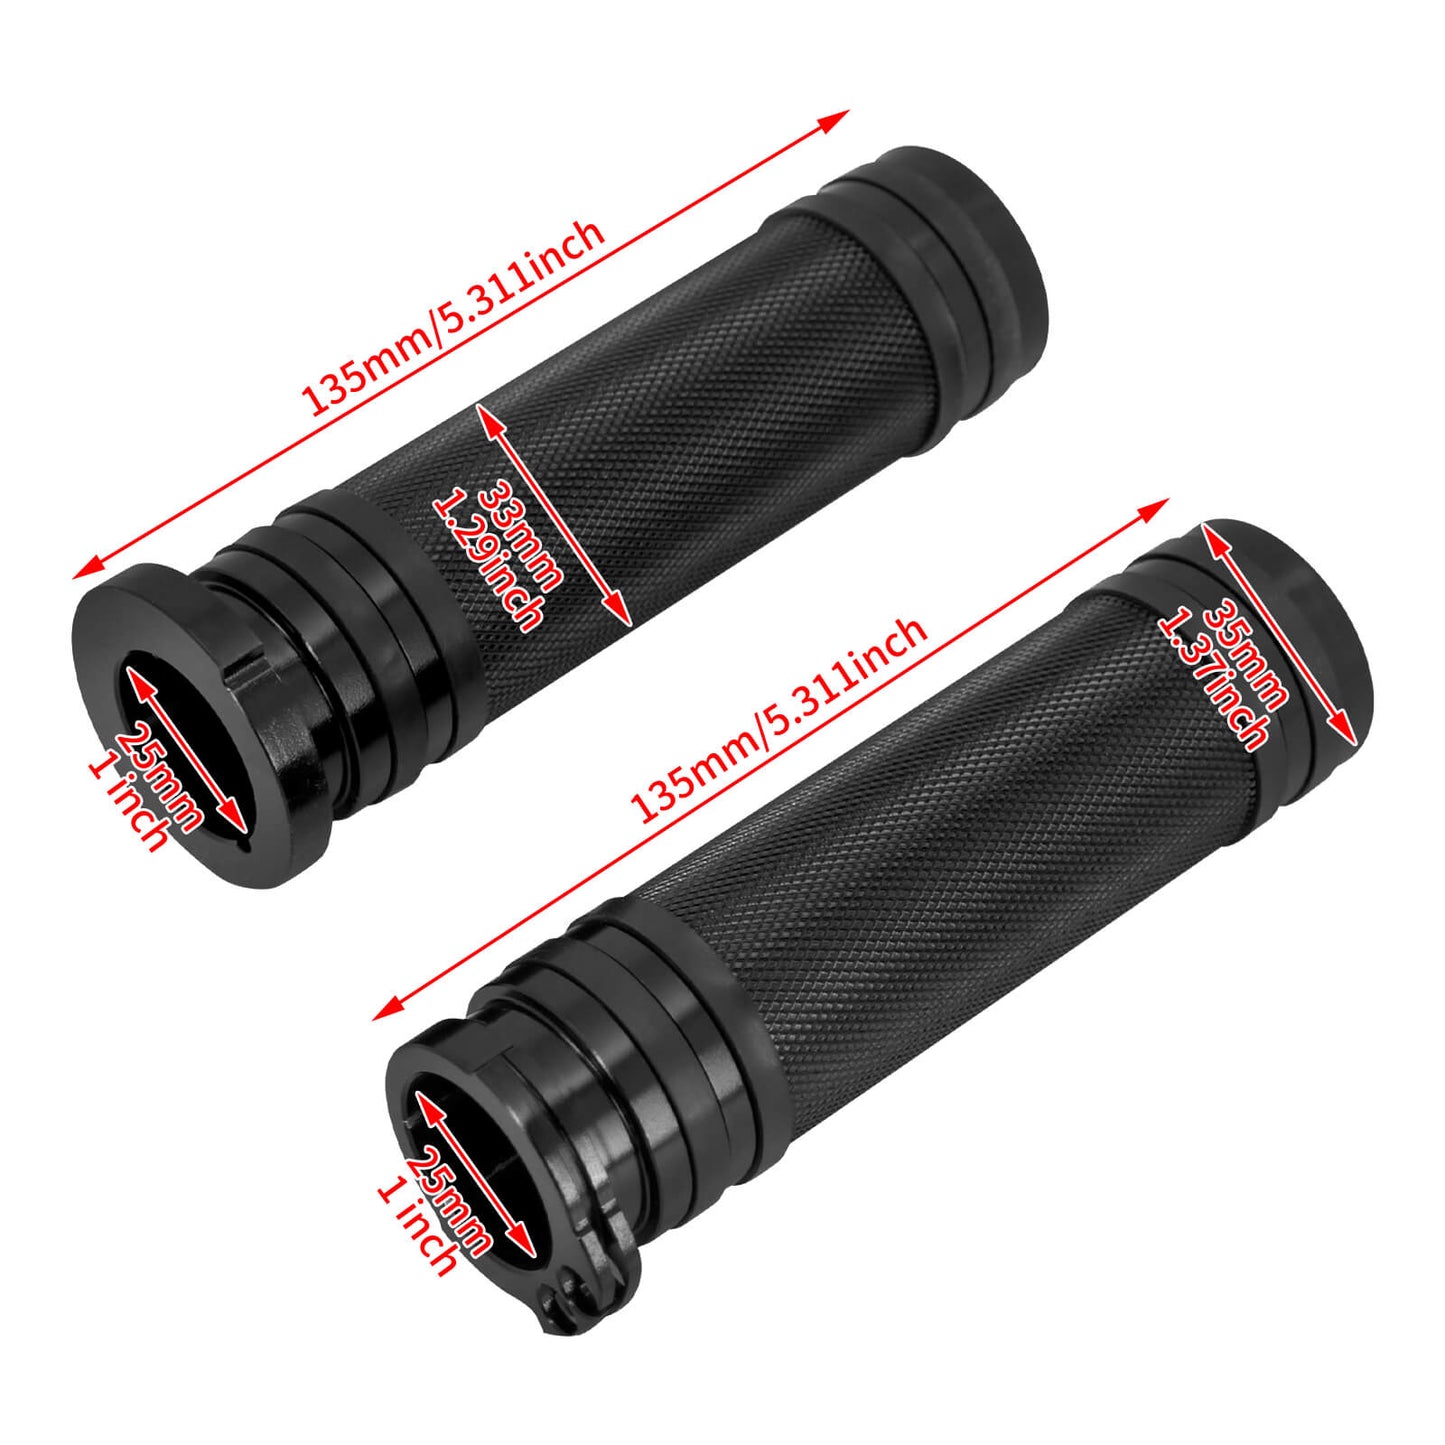 1inch 25mm hand grips for harley motorcycle